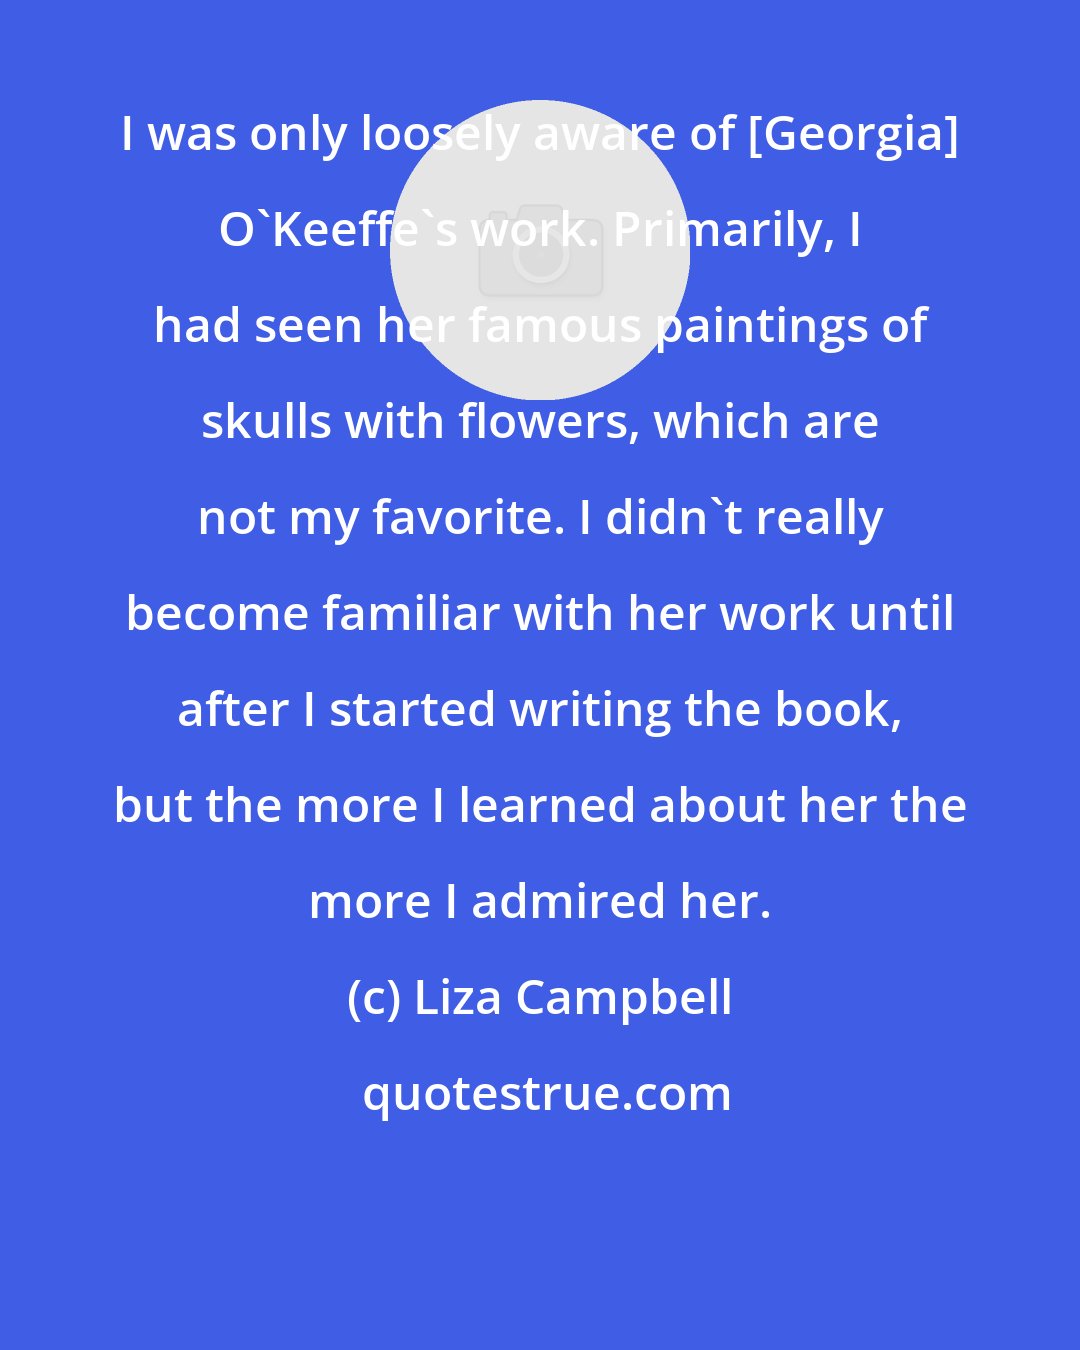 Liza Campbell: I was only loosely aware of [Georgia] O'Keeffe's work. Primarily, I had seen her famous paintings of skulls with flowers, which are not my favorite. I didn't really become familiar with her work until after I started writing the book, but the more I learned about her the more I admired her.